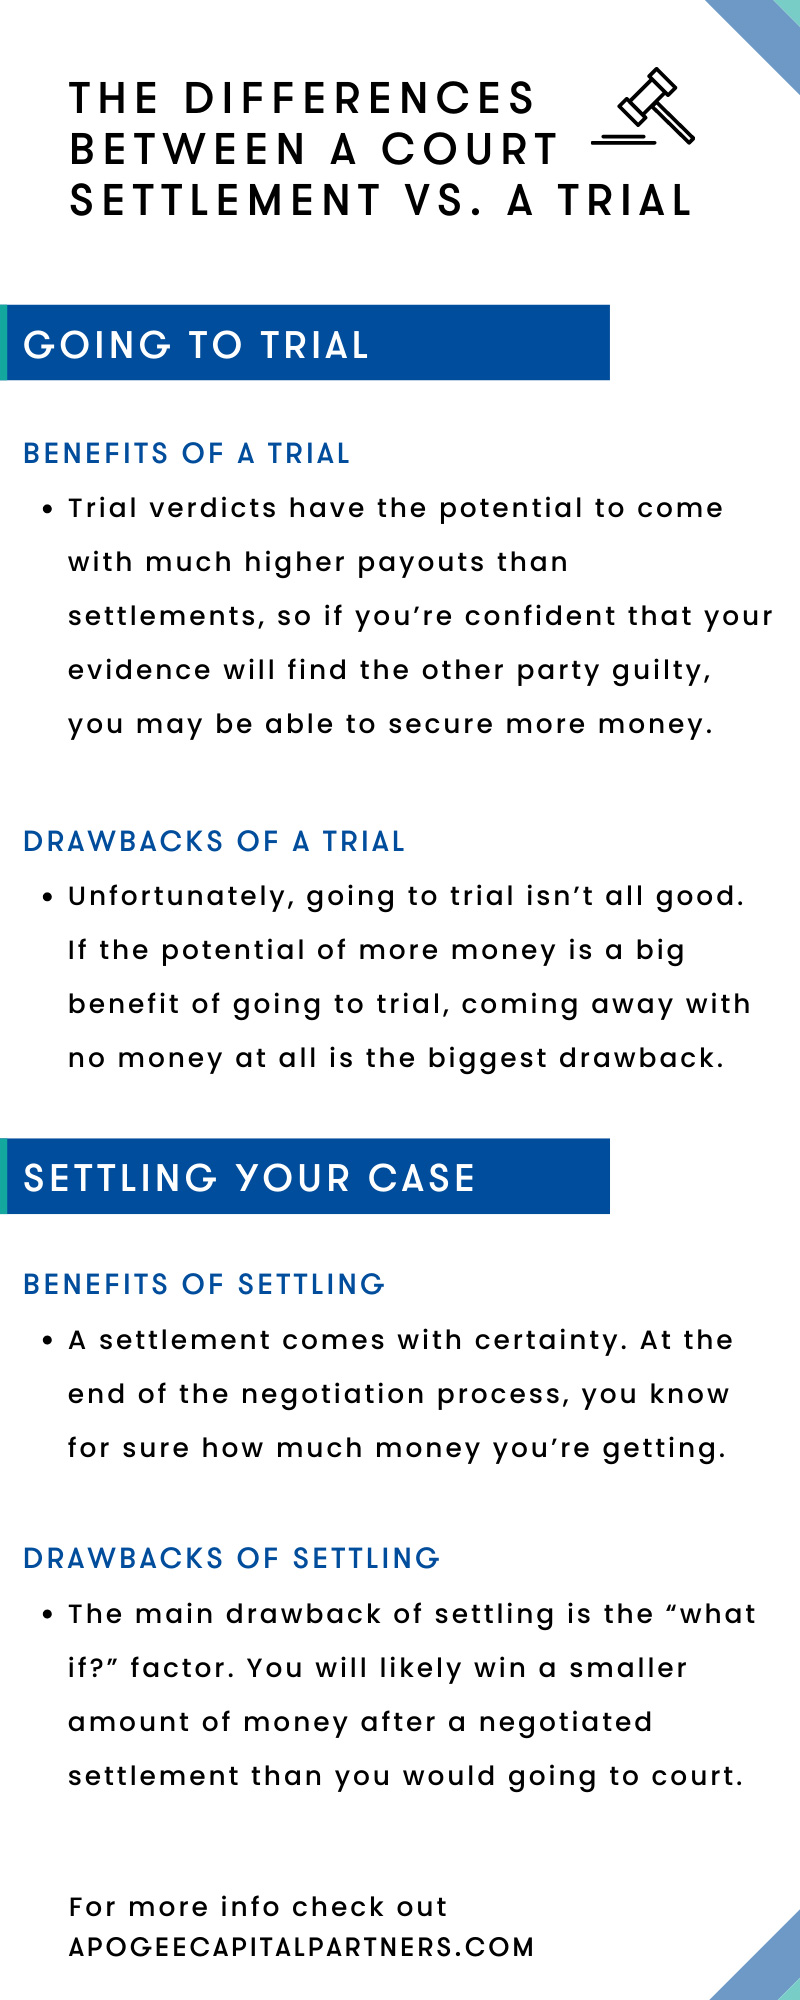 The Differences Between a Court Settlement vs. a Trial